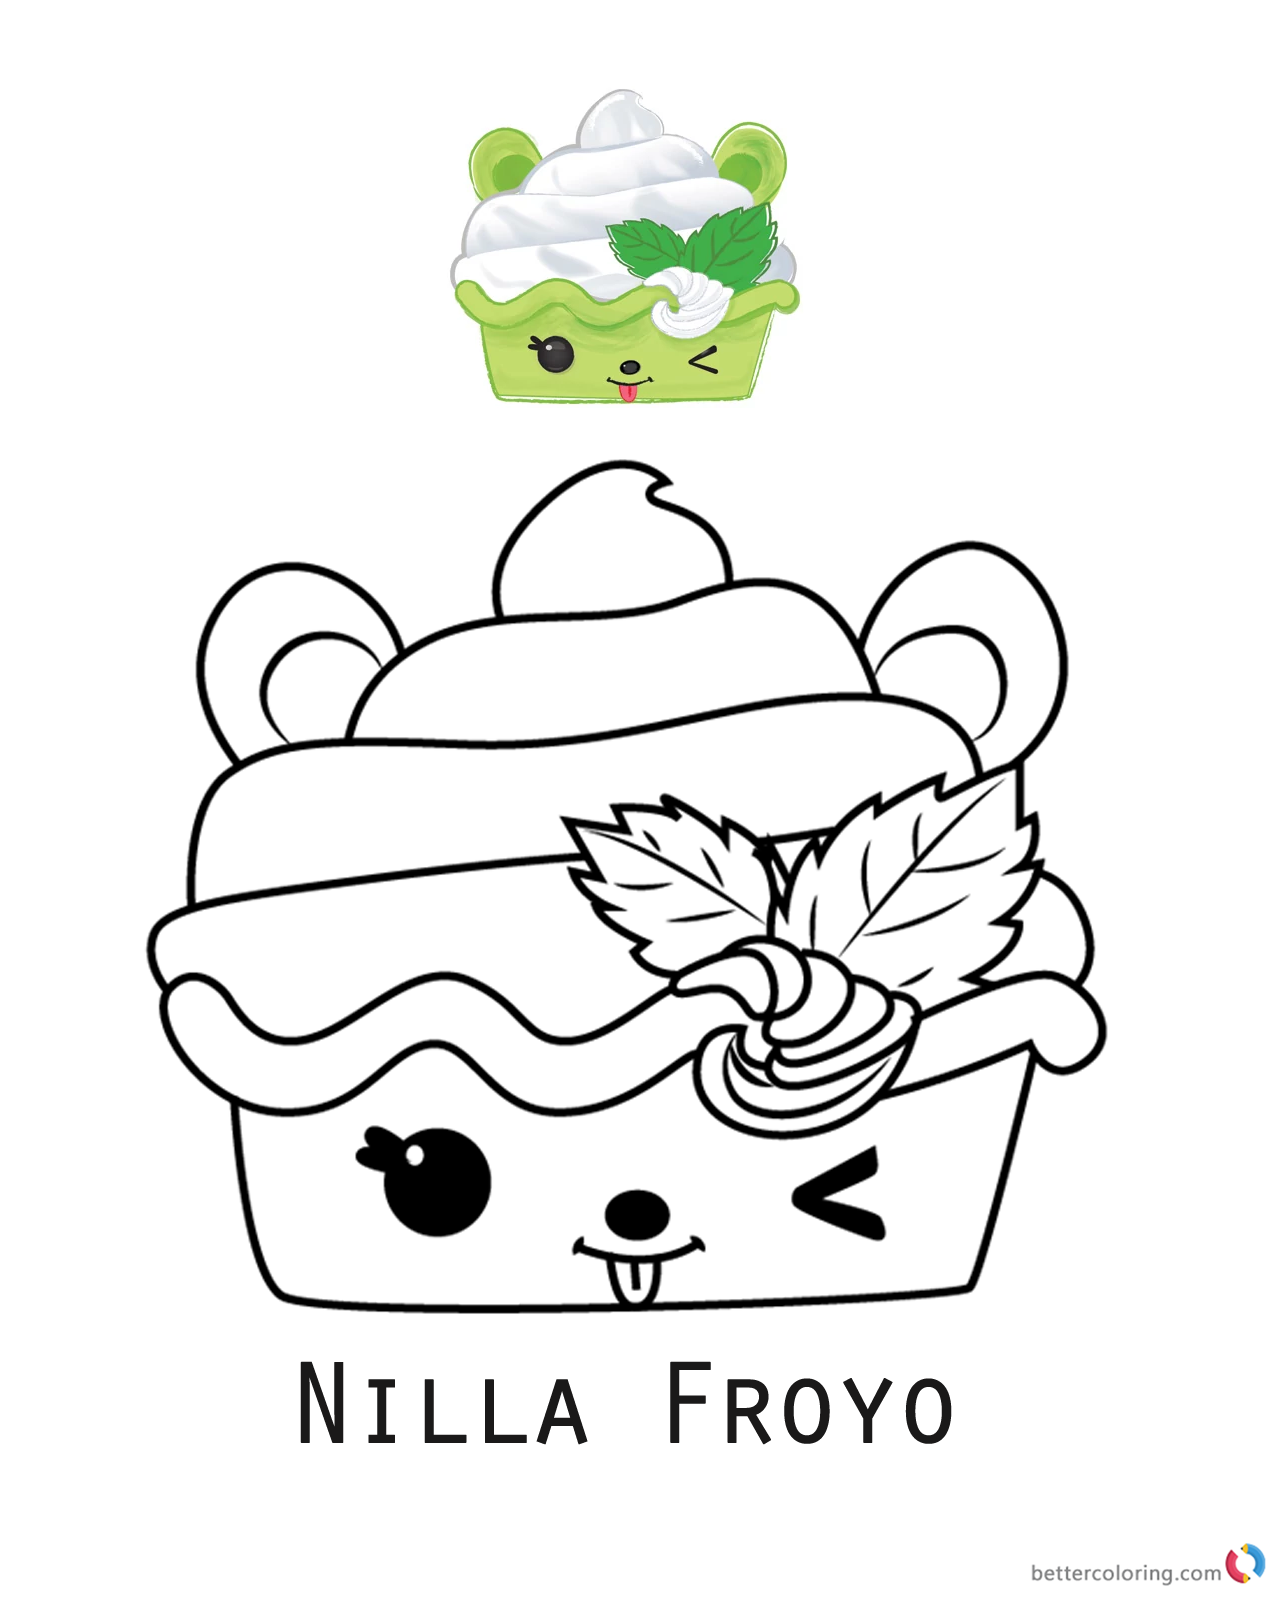 Num Froyo Noms Coloring Nilla Pages Printable Sheet Series Template Betterc...